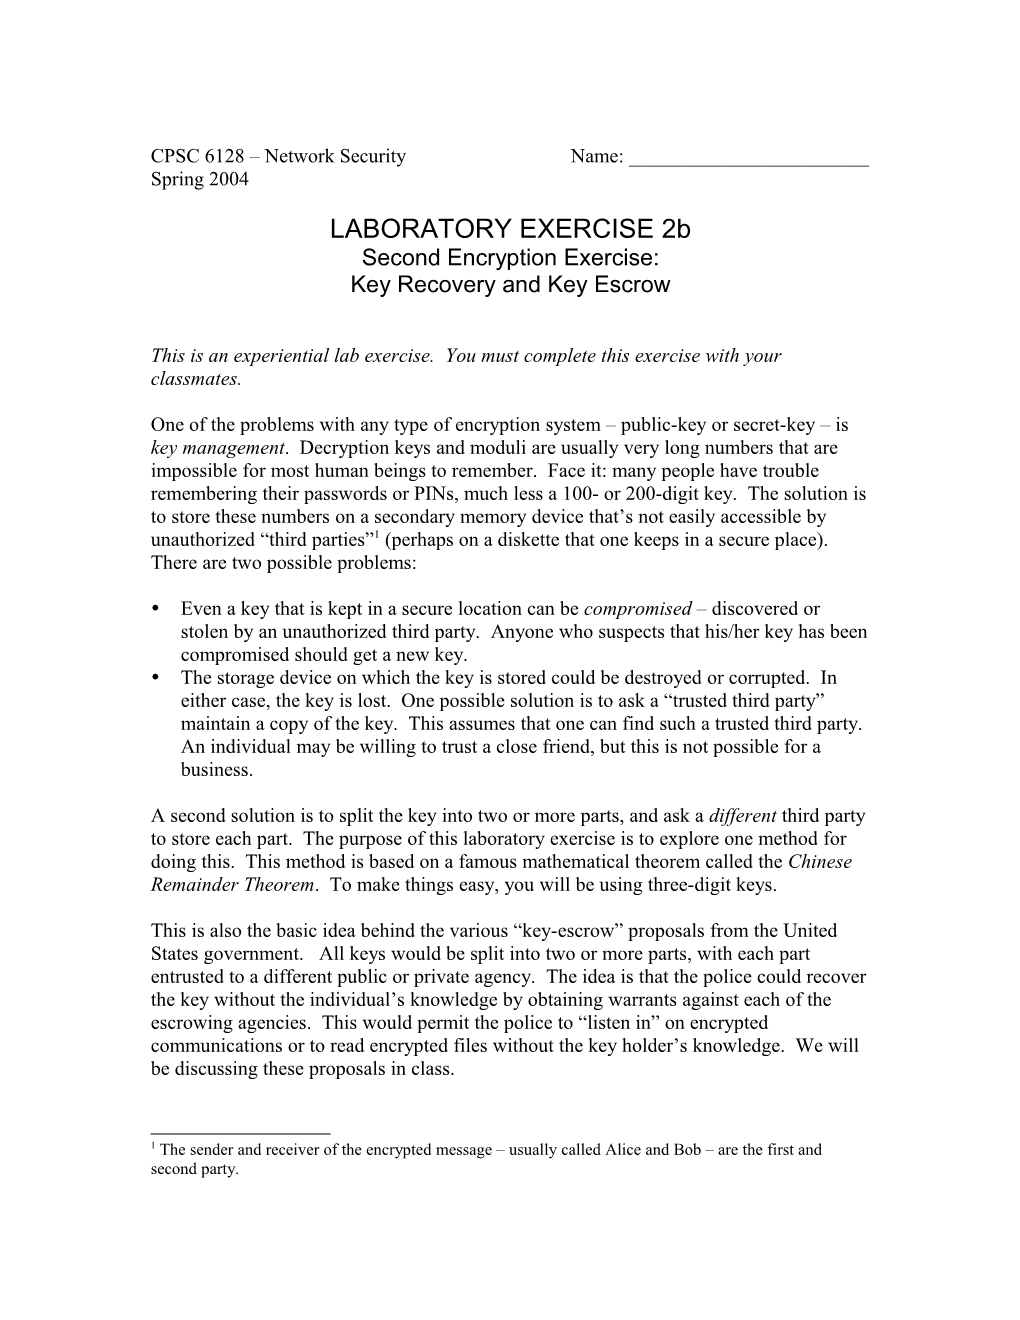 Lab Exercise Xivpage 1